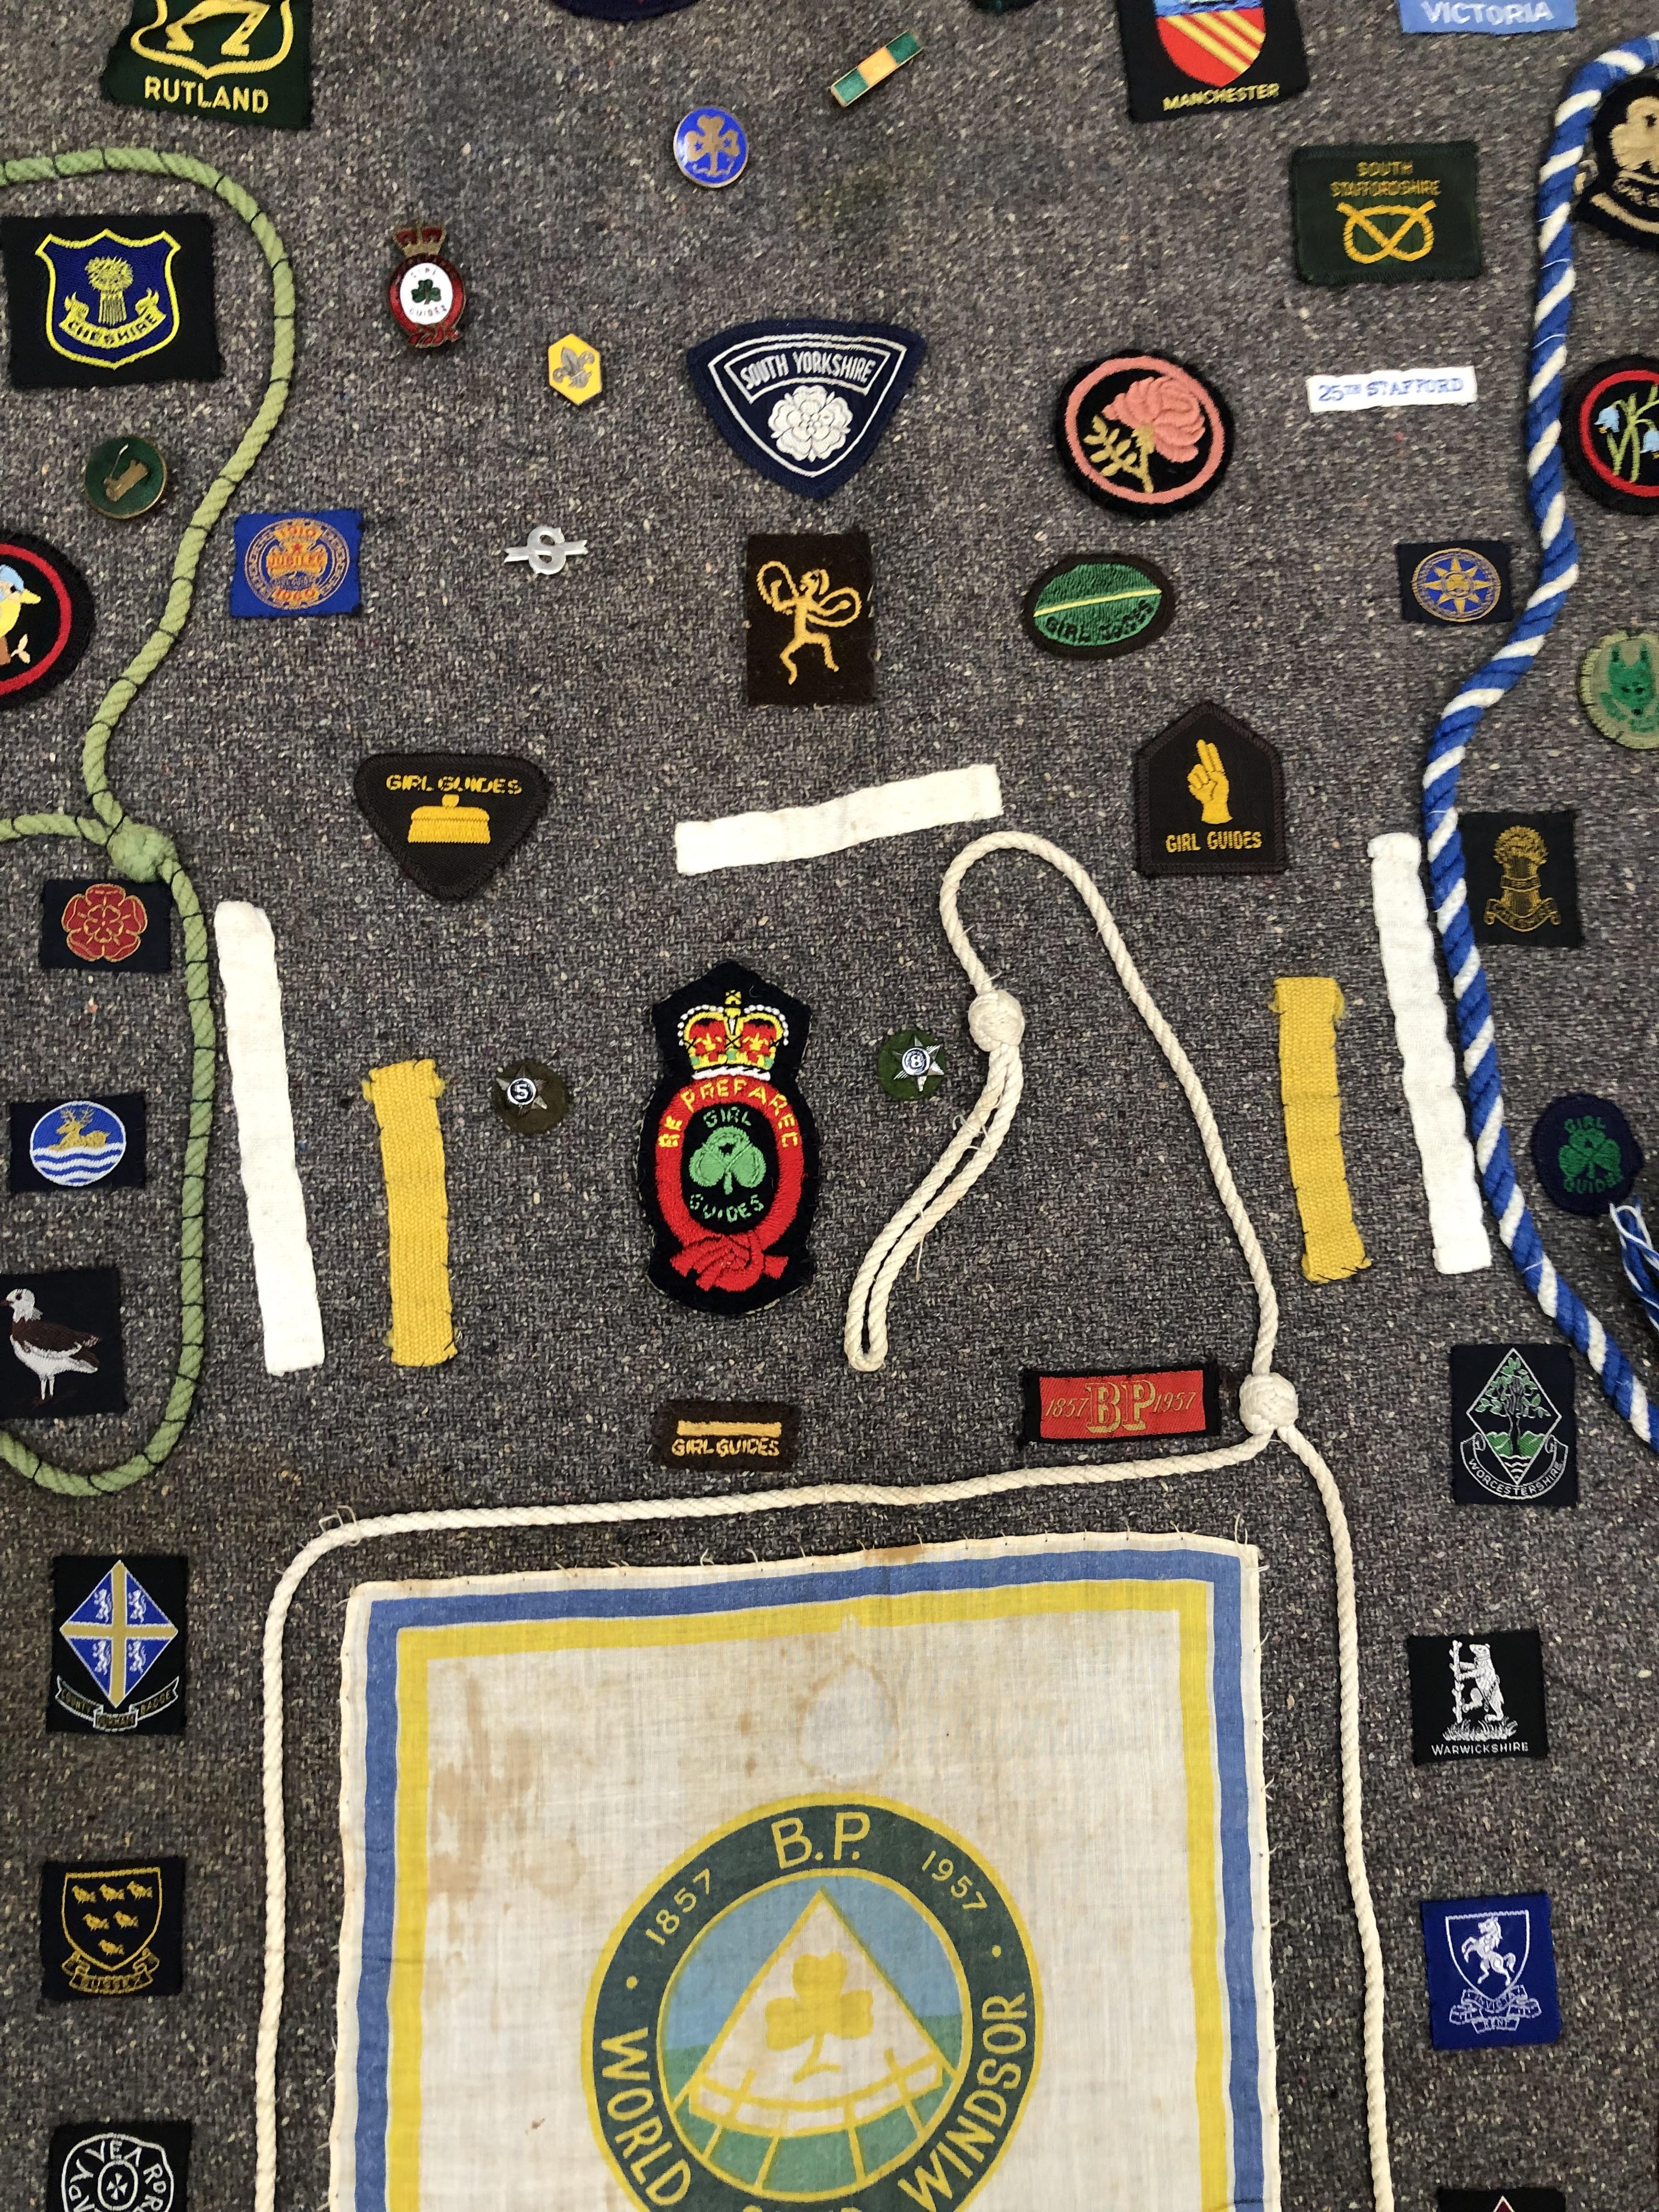 A GIRL GUIDE BLANKET WITH VINTAGE BADGES AND MEMORABILIA - Image 3 of 6